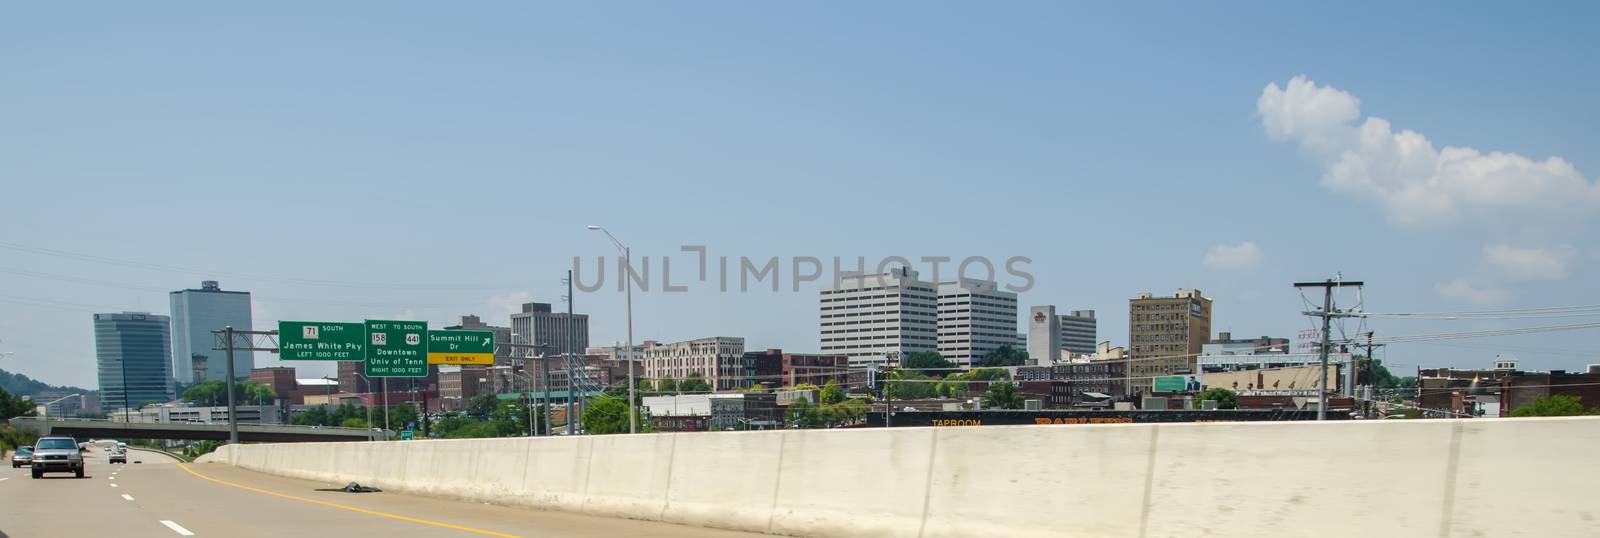 Views of Knoxville Tennessee downtown on sunny day by digidreamgrafix